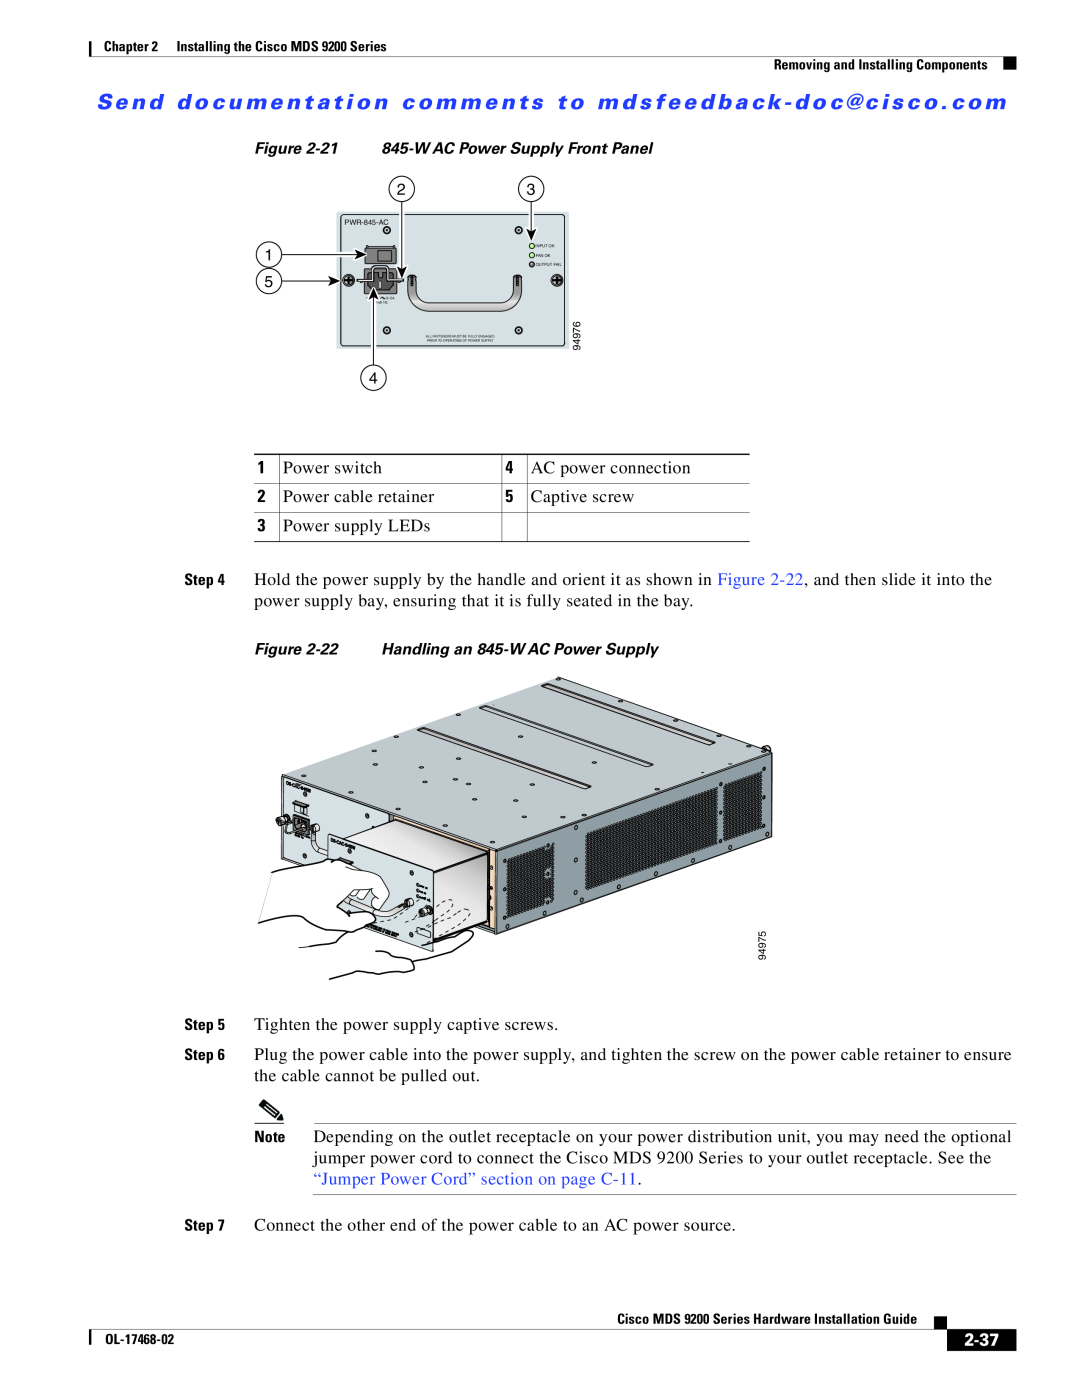 Cisco Systems MDS 9200 Series manual 2-37, 21 845-W AC Power Supply Front Panel, 22 Handling an 845-W AC Power Supply 